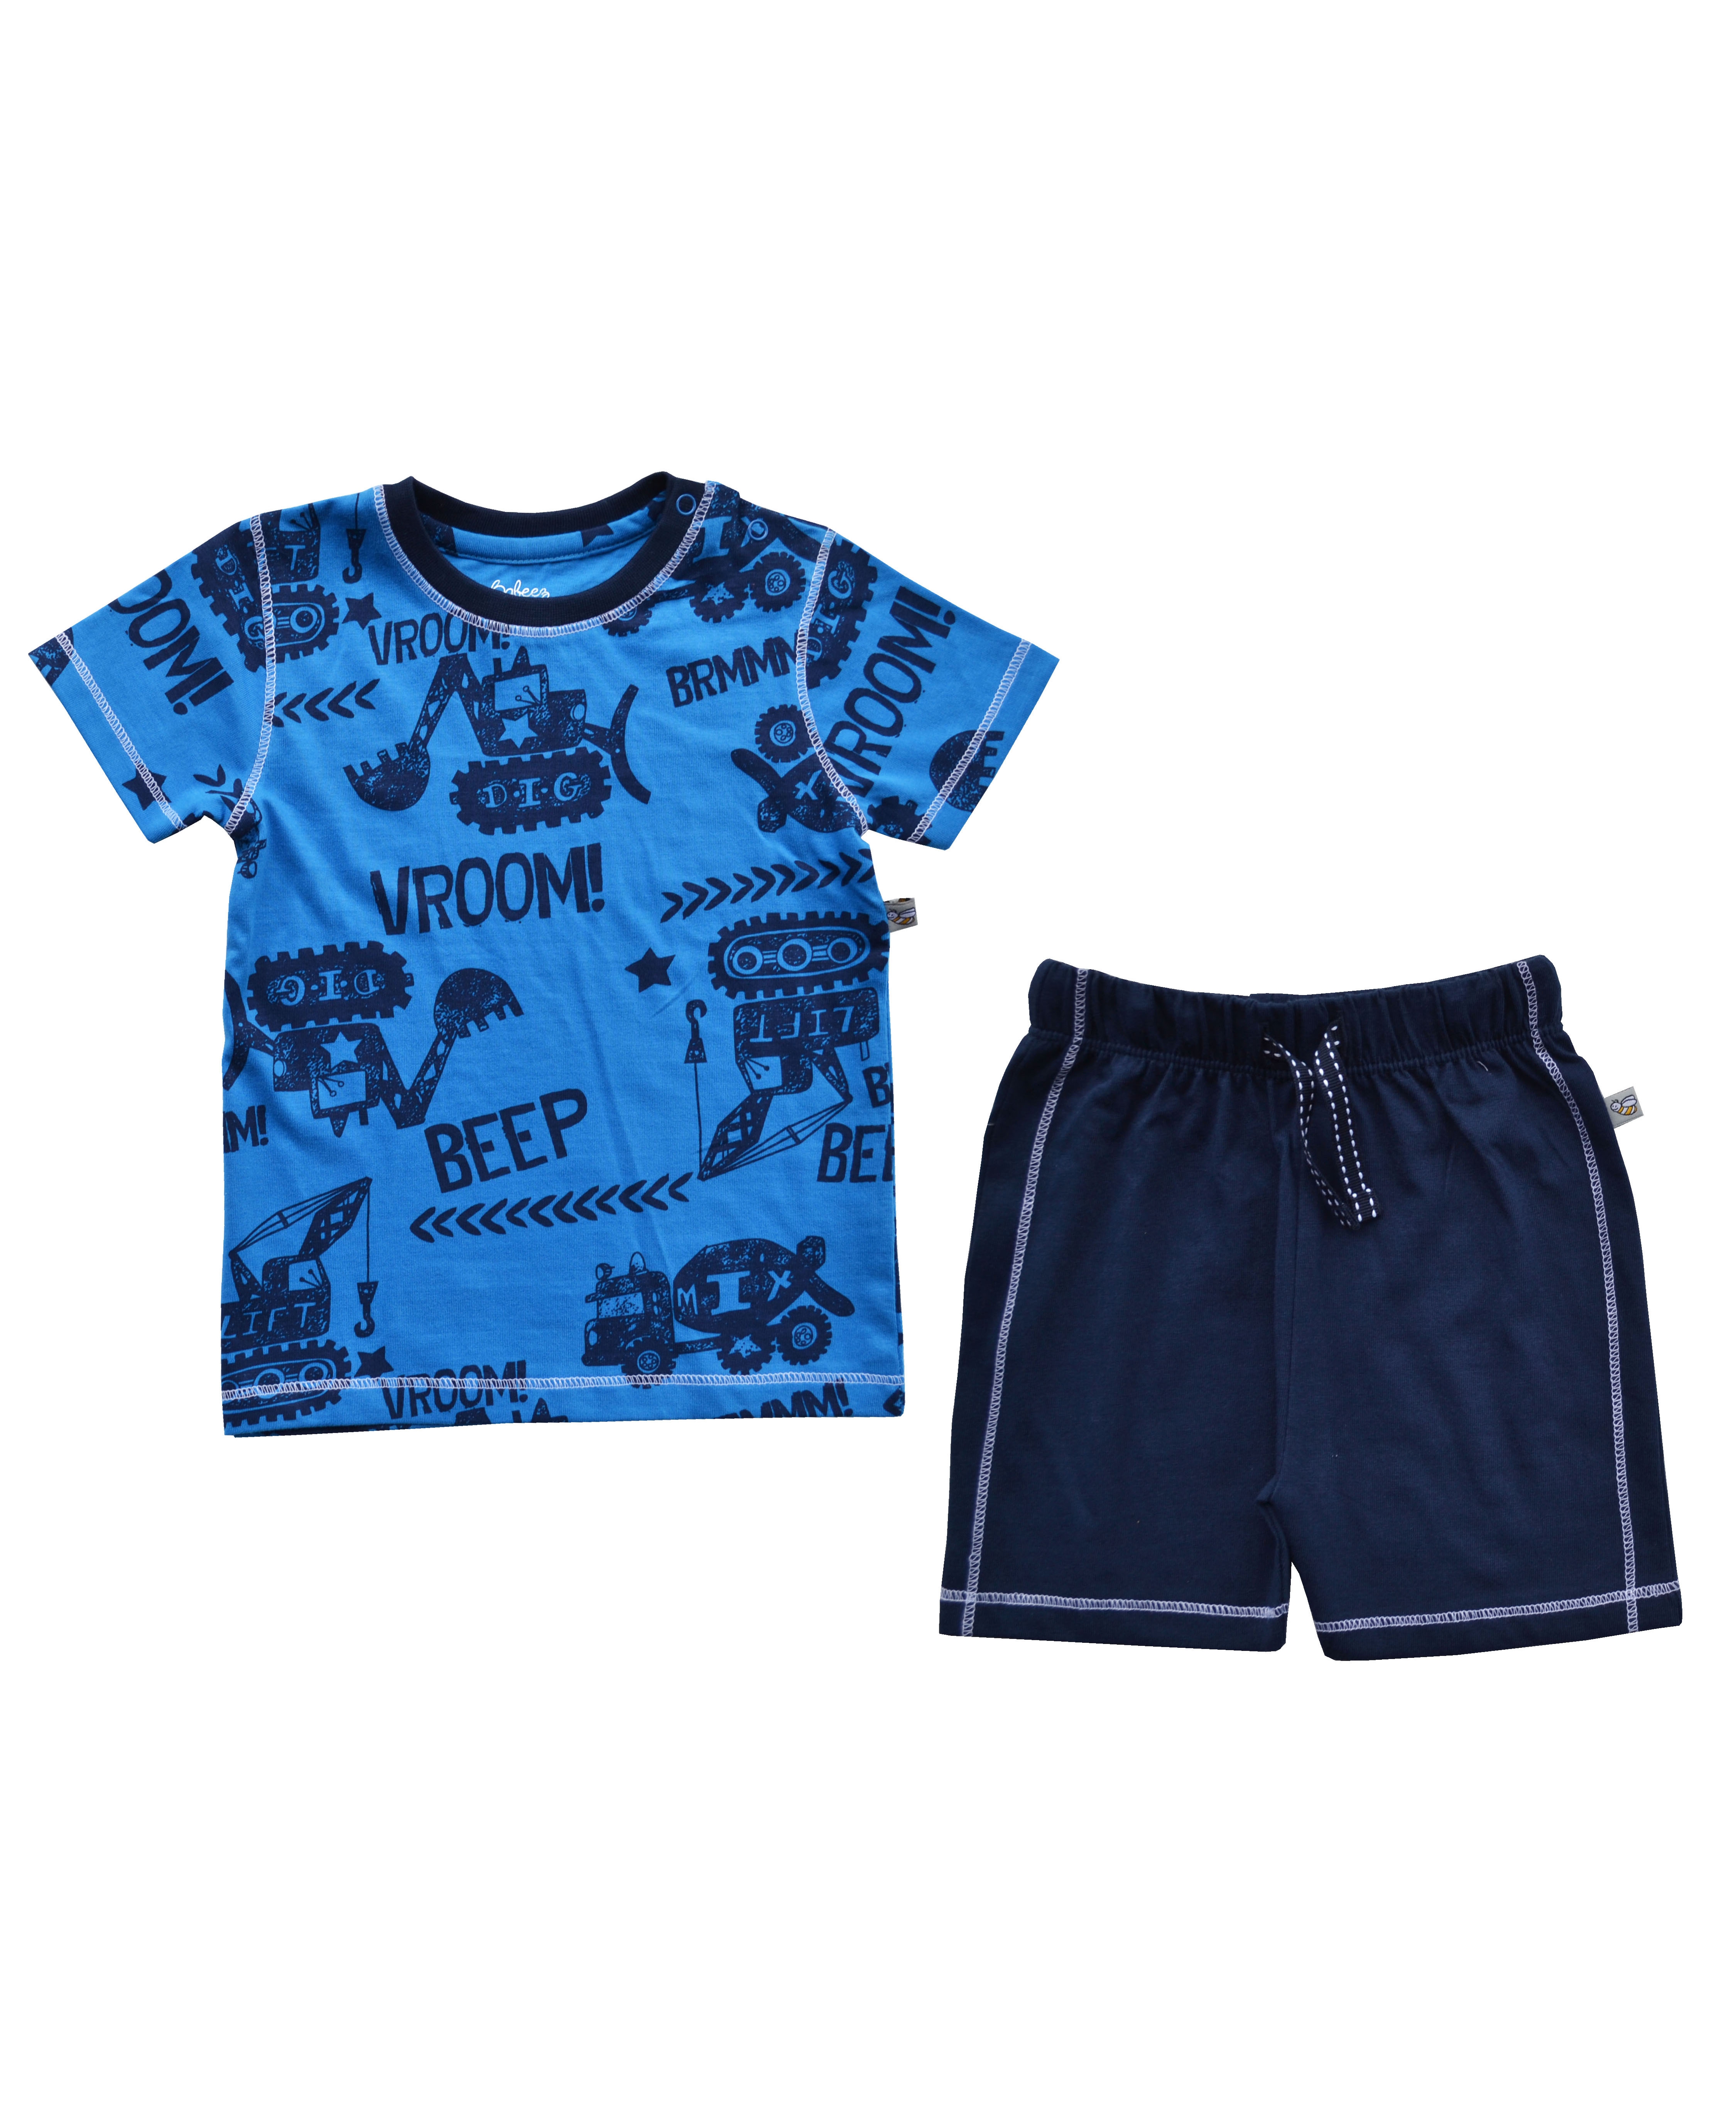 Blue Allover Car Printed T-Shirt + Navy Shorty Set (100% Cotton Jersey)